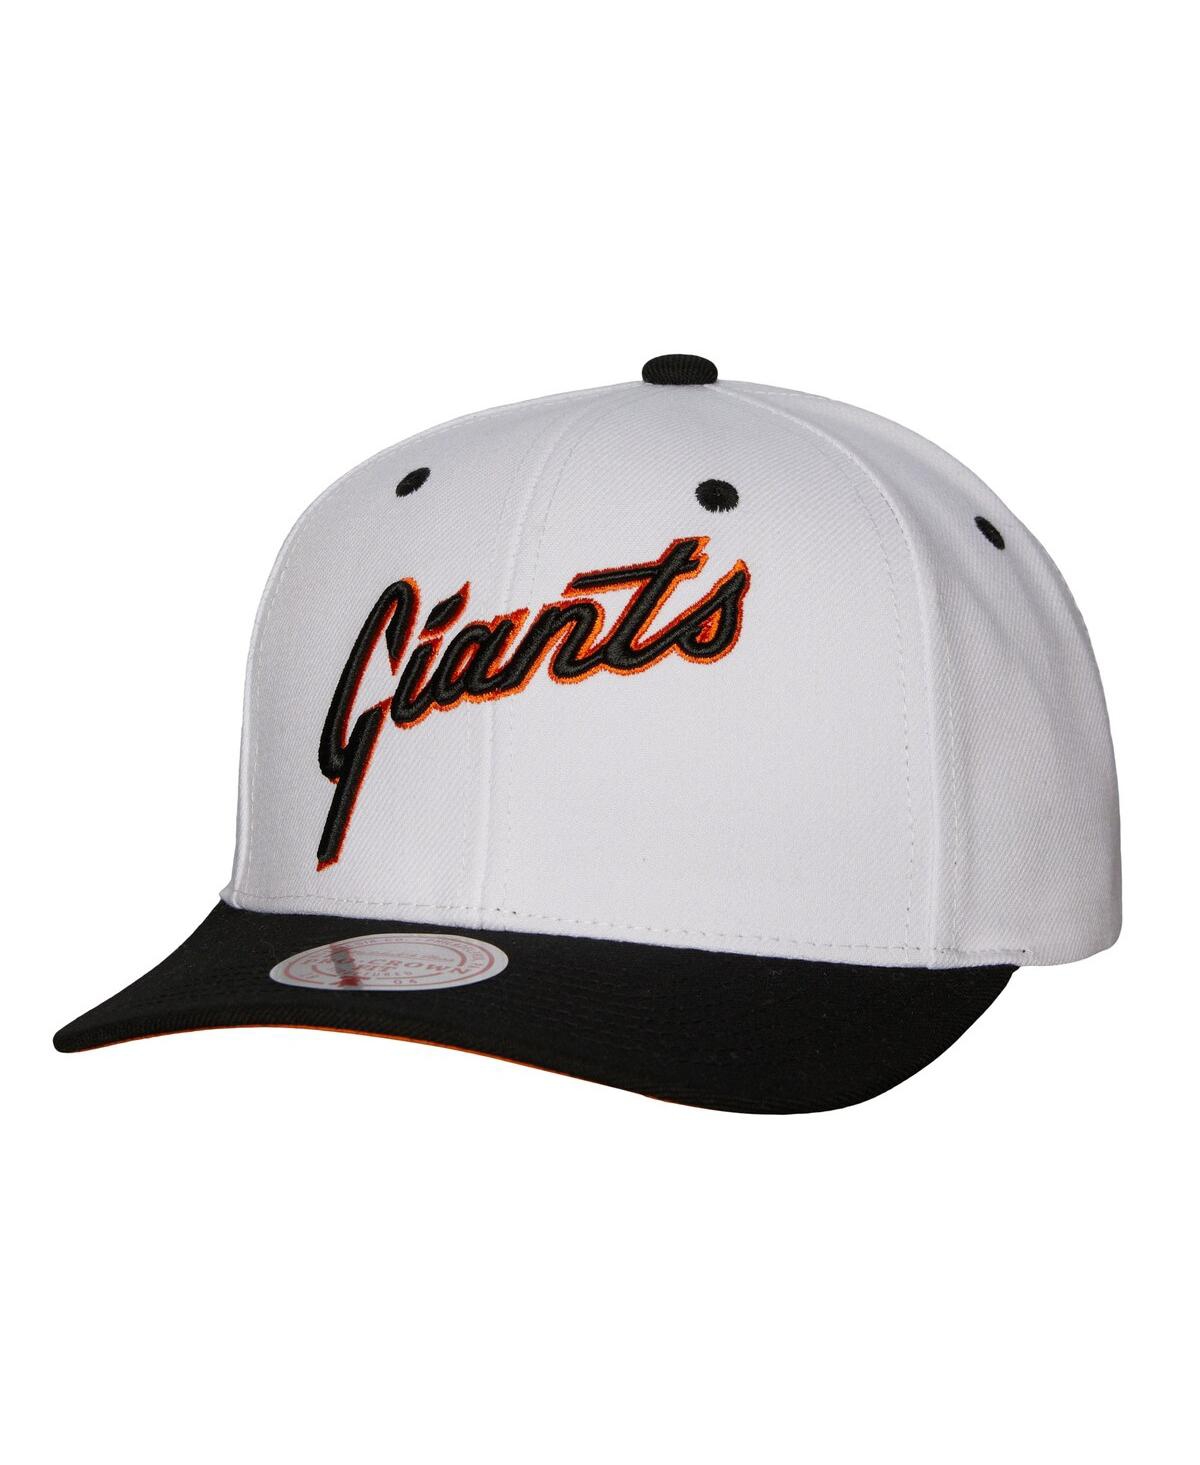 Mitchell & Ness Men's  White San Francisco Giants Cooperstown Collection Pro Crown Snapback Hat